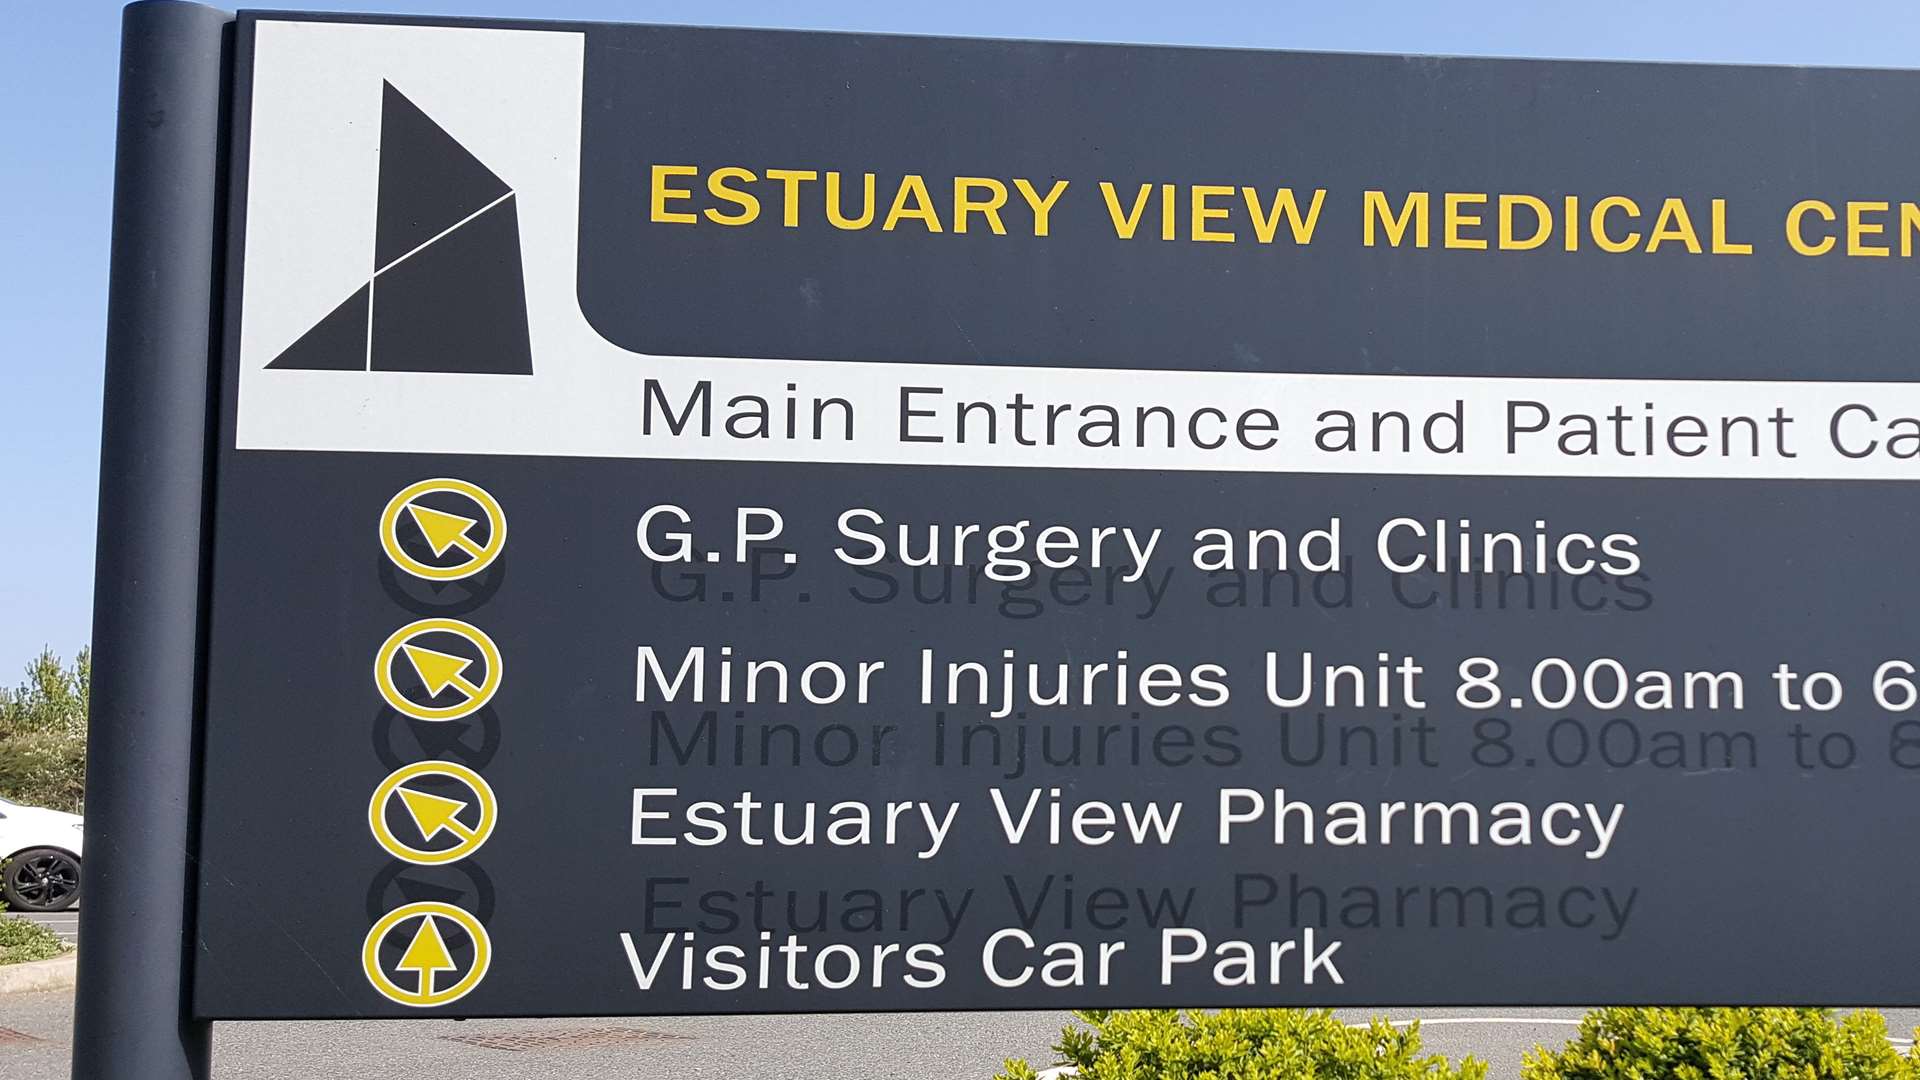 The Estuary View Medical Centre sign is missing an apostrophe